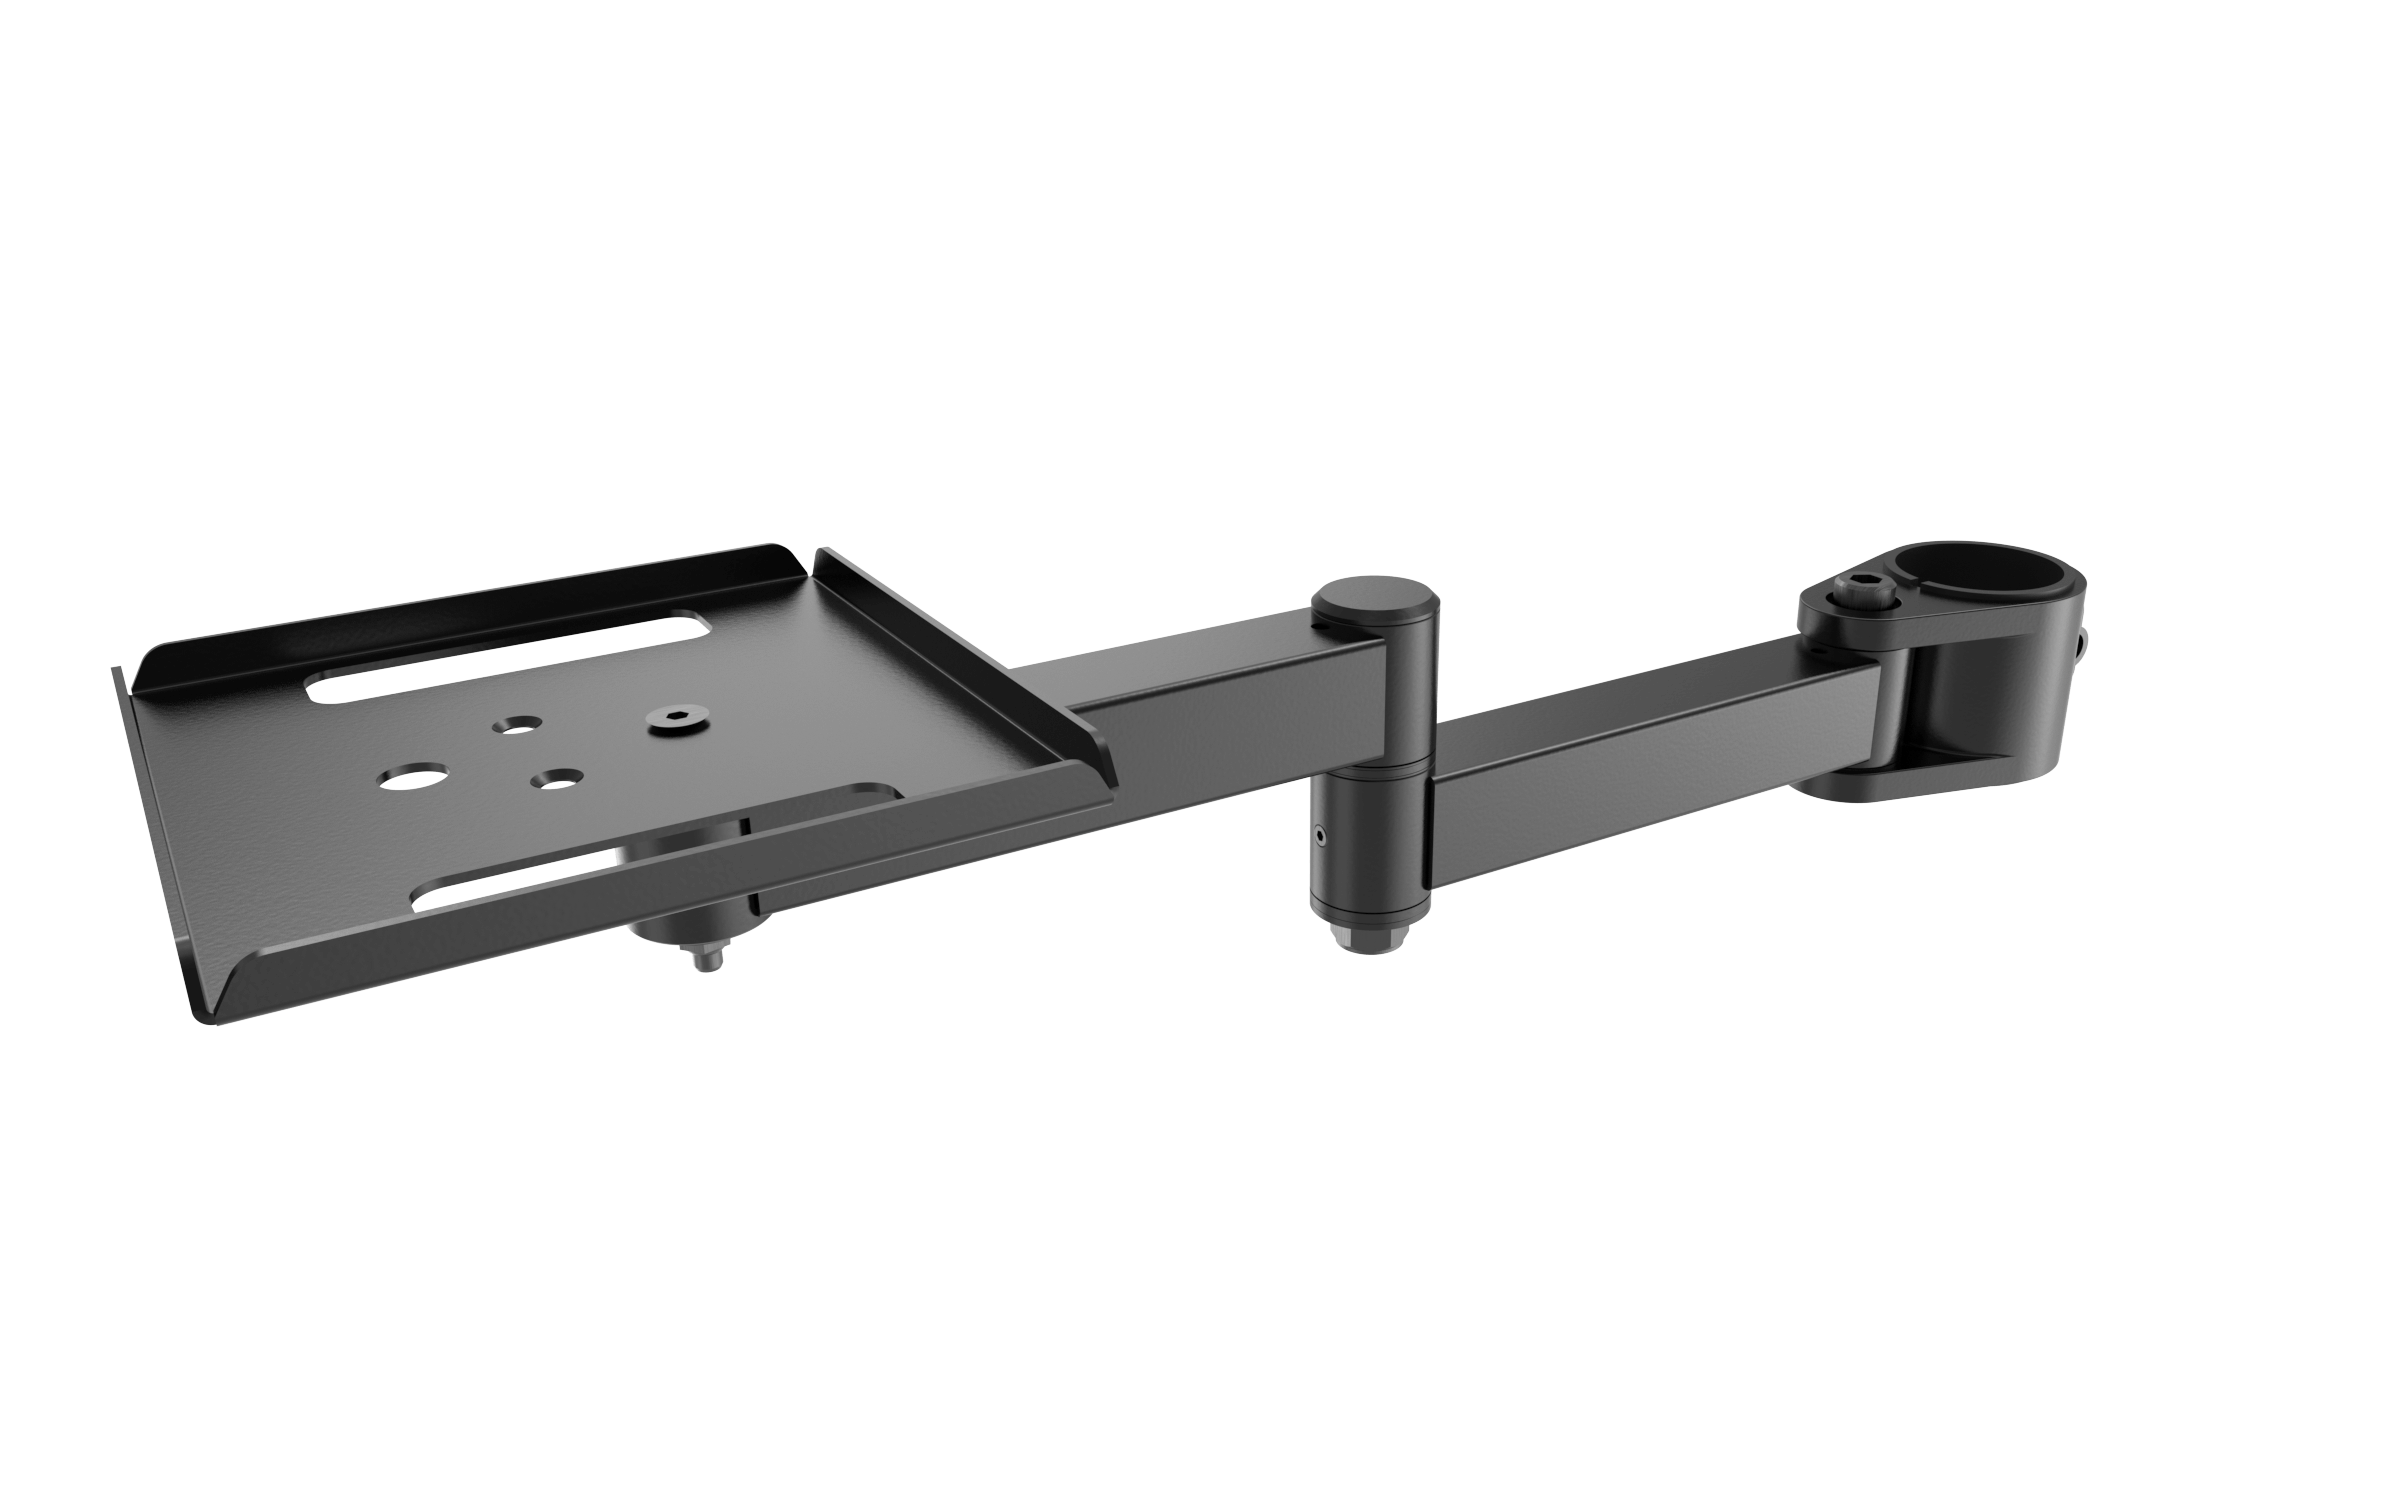 Printer Mount Includes 16″ Folding Extension Arm & Small Tray